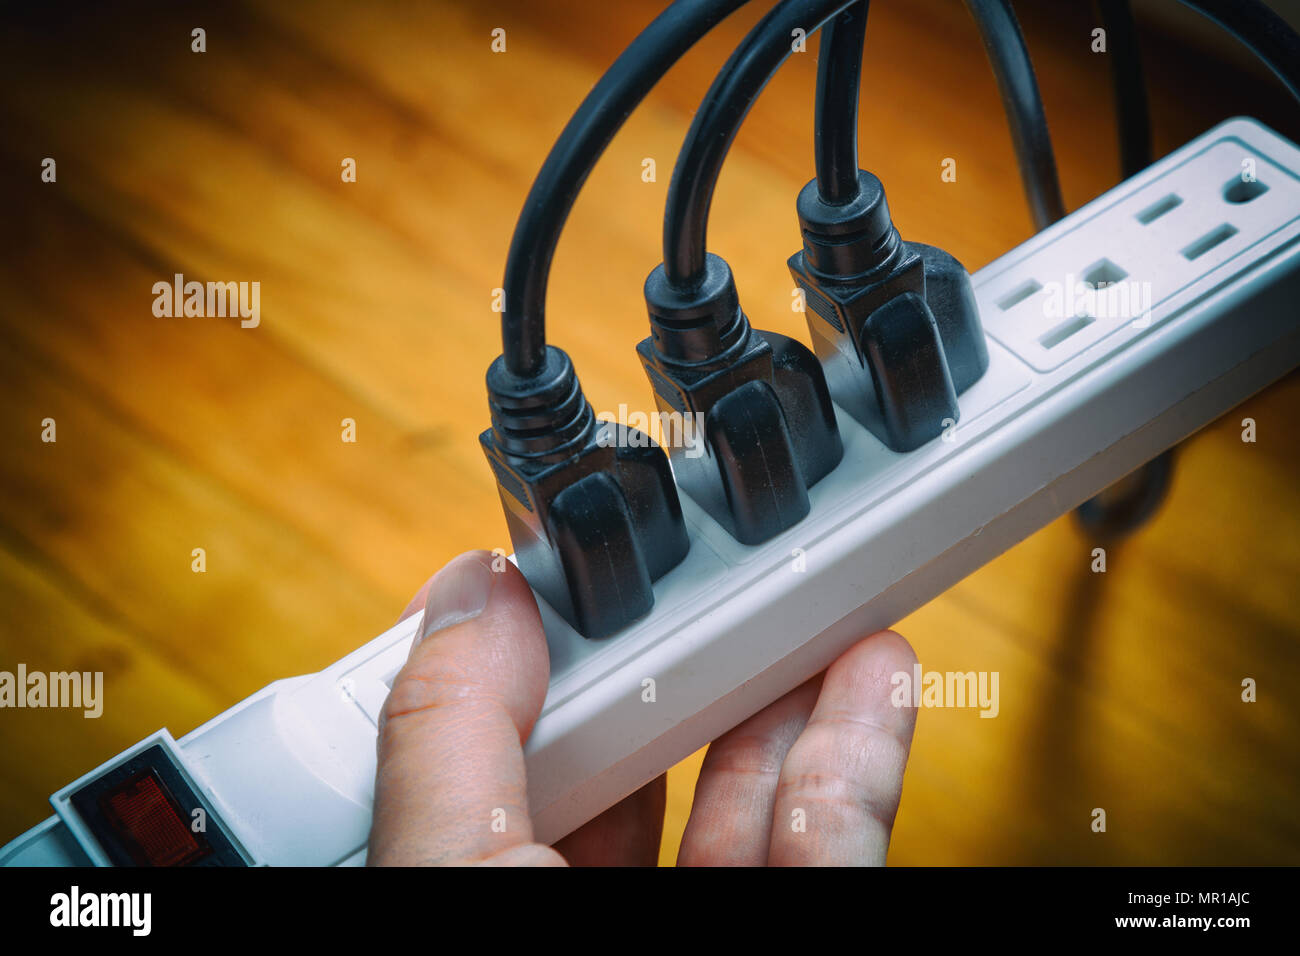 electrical plugs connected to a power strip Stock Photo